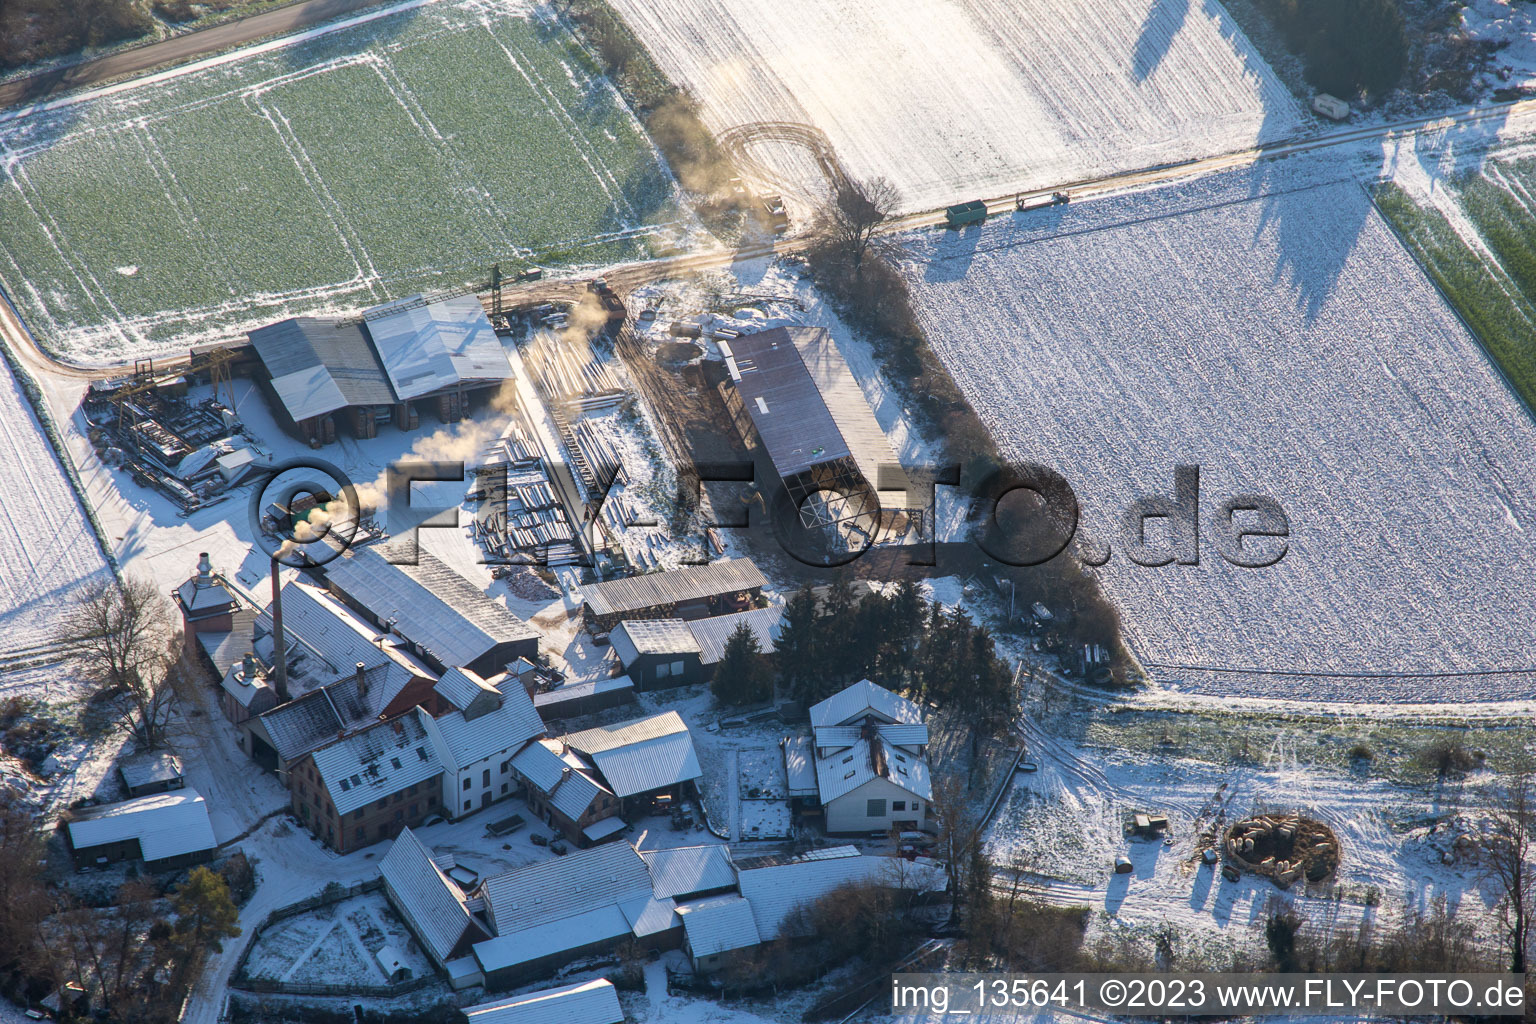 Aerial view of ORTH woodworks in winter with snow in the district Schaidt in Wörth am Rhein in the state Rhineland-Palatinate, Germany